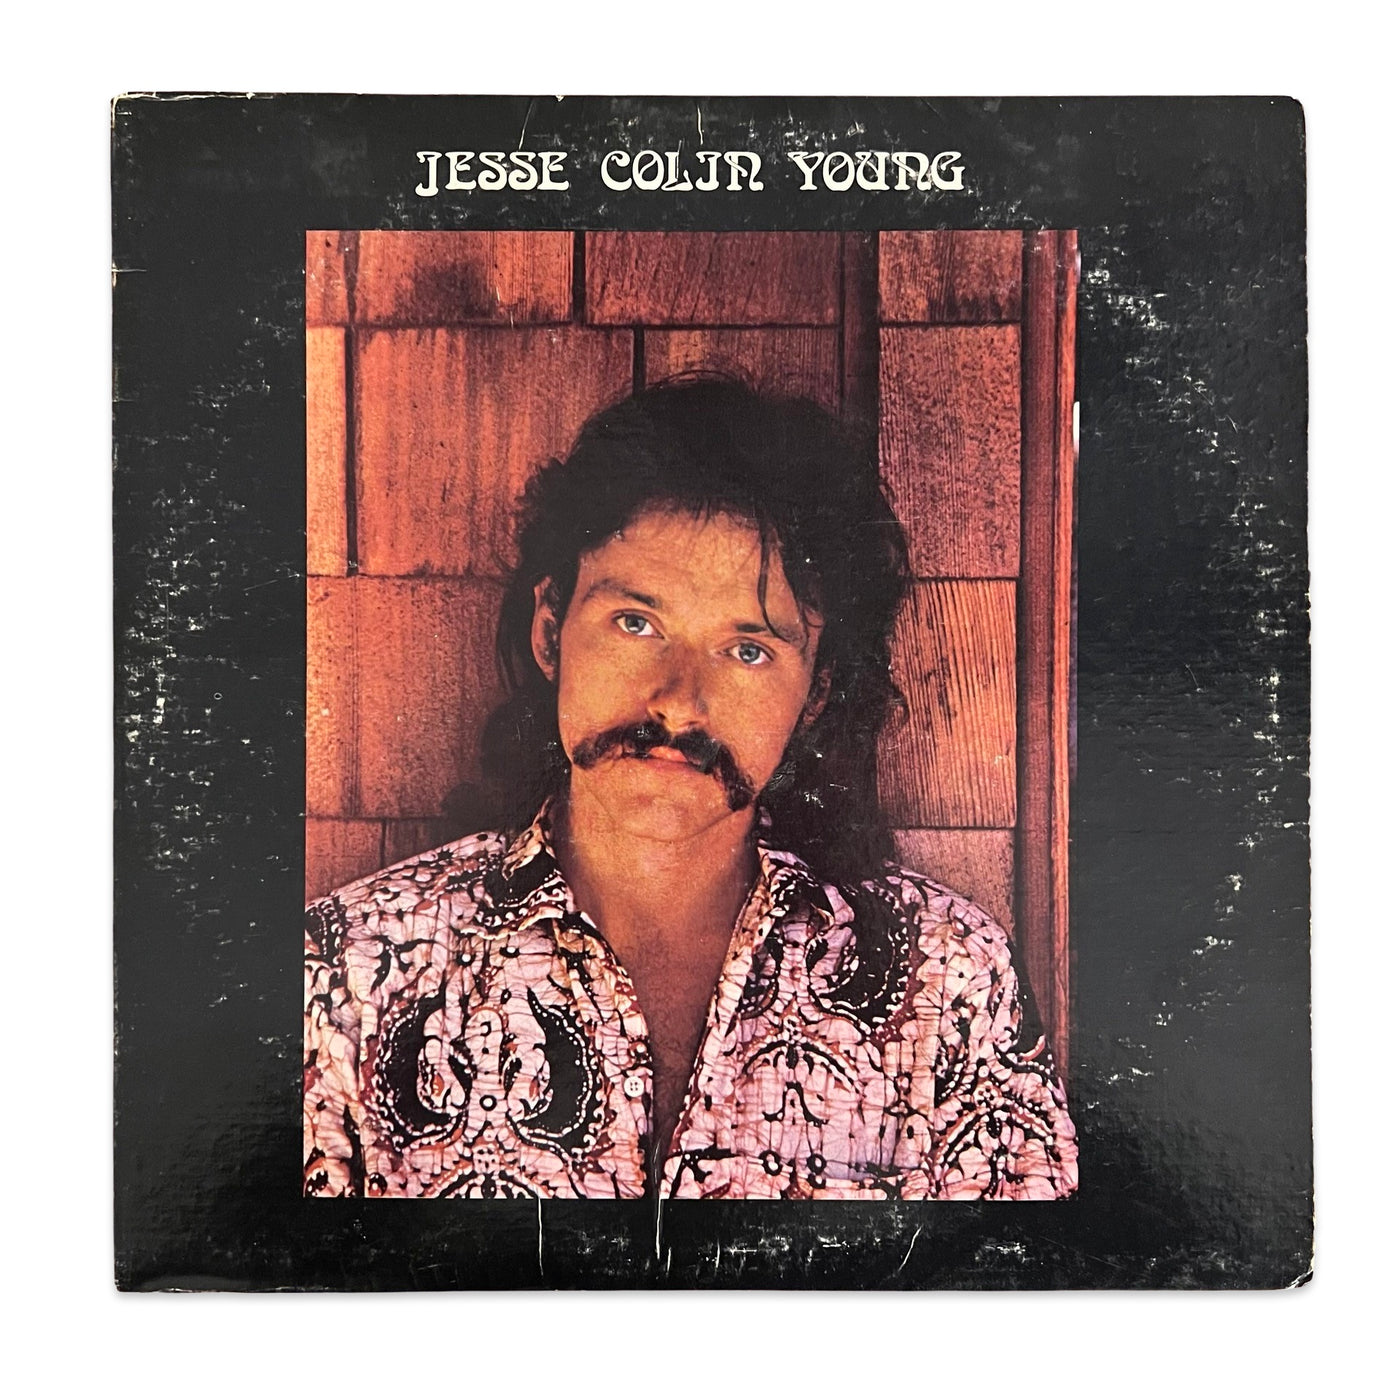 Jesse Colin Young – Song For Juli (1973, Terre Haute Pressing)